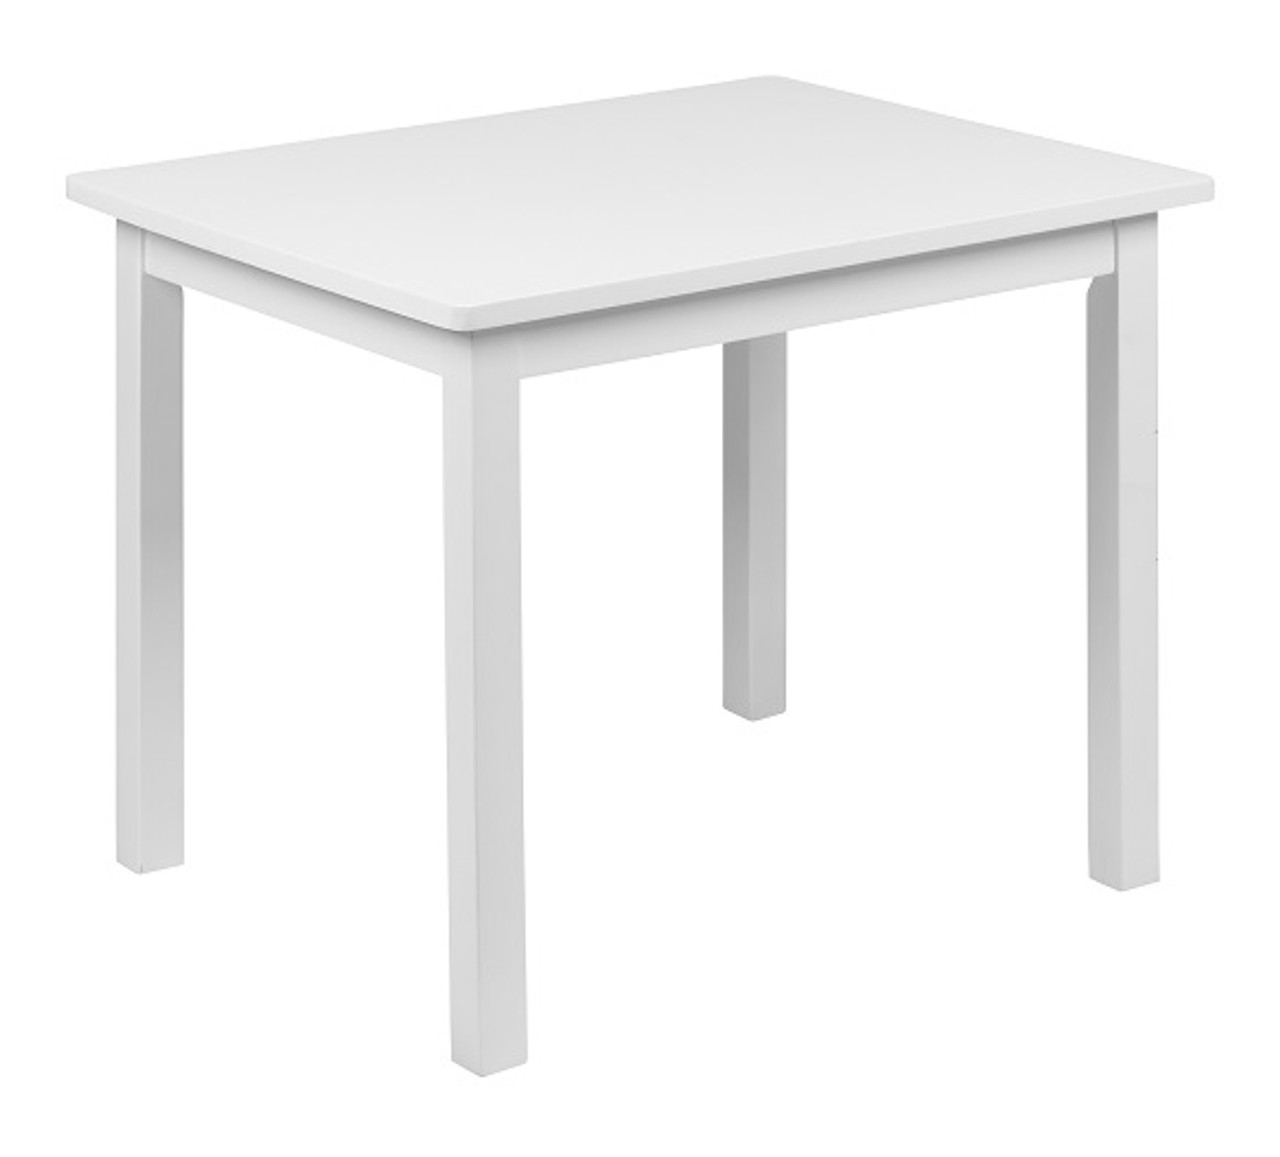 https://cdn11.bigcommerce.com/s-jzfl8u8cx1/images/stencil/1280x1280/products/6437/27501/Cameron_White_Kids_Table__22316.1648065904.jpg?c=1?imbypass=on